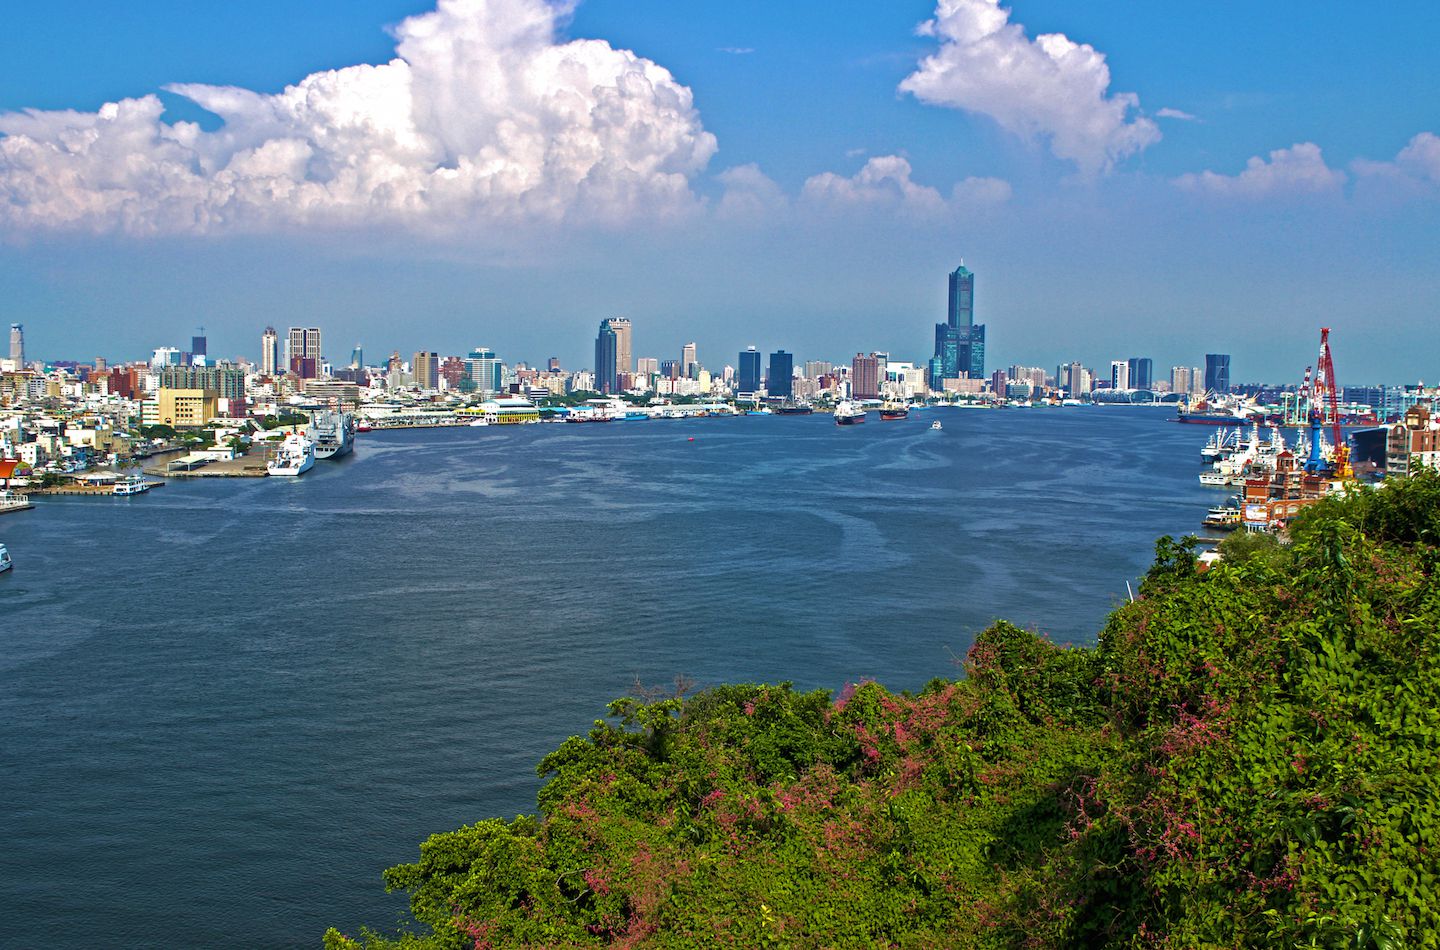 View of Kaohsiung's port from the Cijin lighthouse